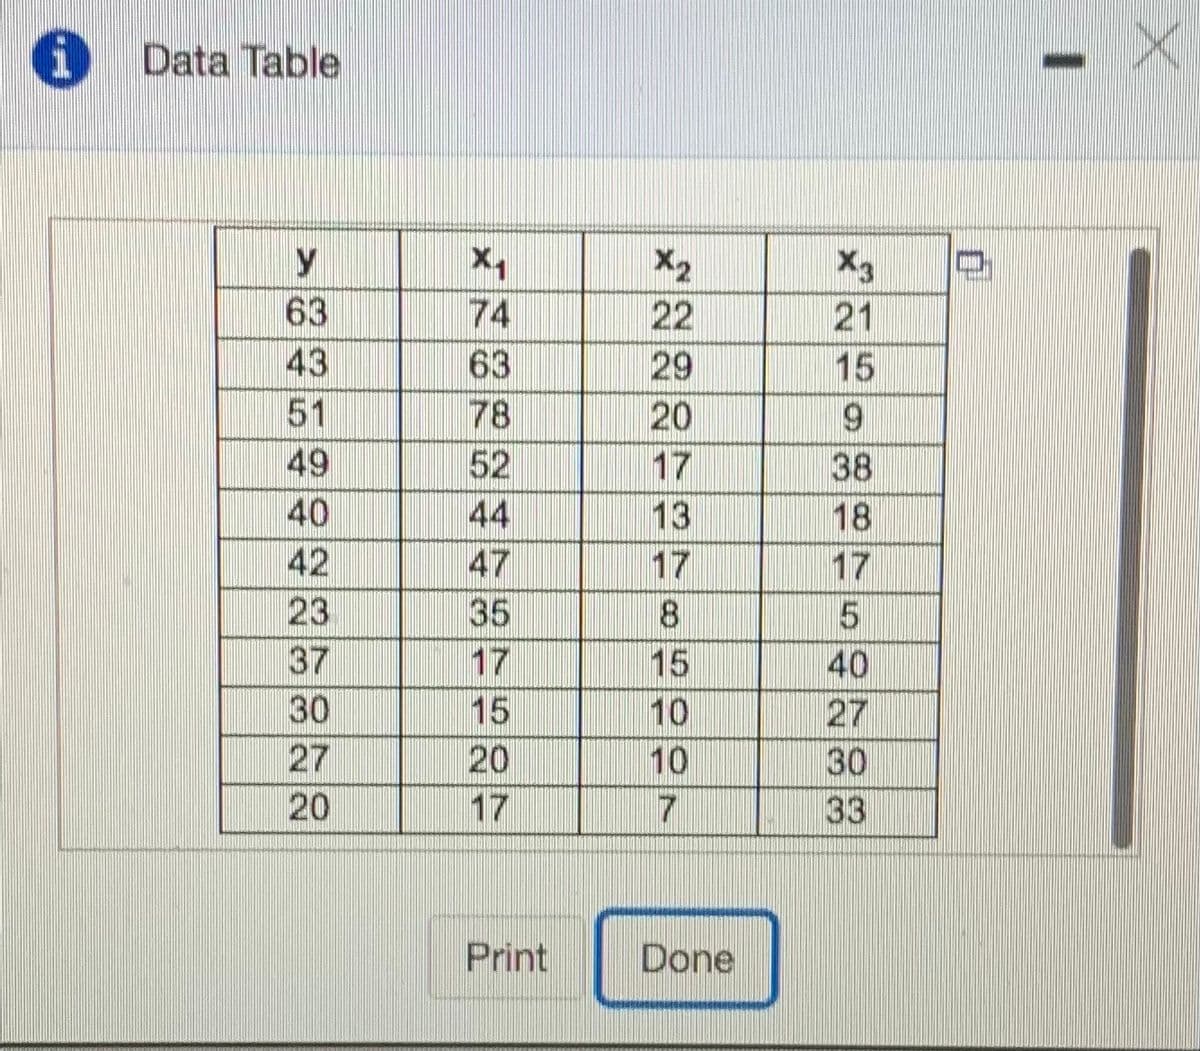 6 Data Table
y
X2
63
74
22
21
43
63
29
15
51
78
20
6.
49
52
17
38
40
44
13
18
42
47
17
17
23
35
8.
37
17
15
40
30
15
10
27
27
20
10
30
20
17
7
33
Print
Done
